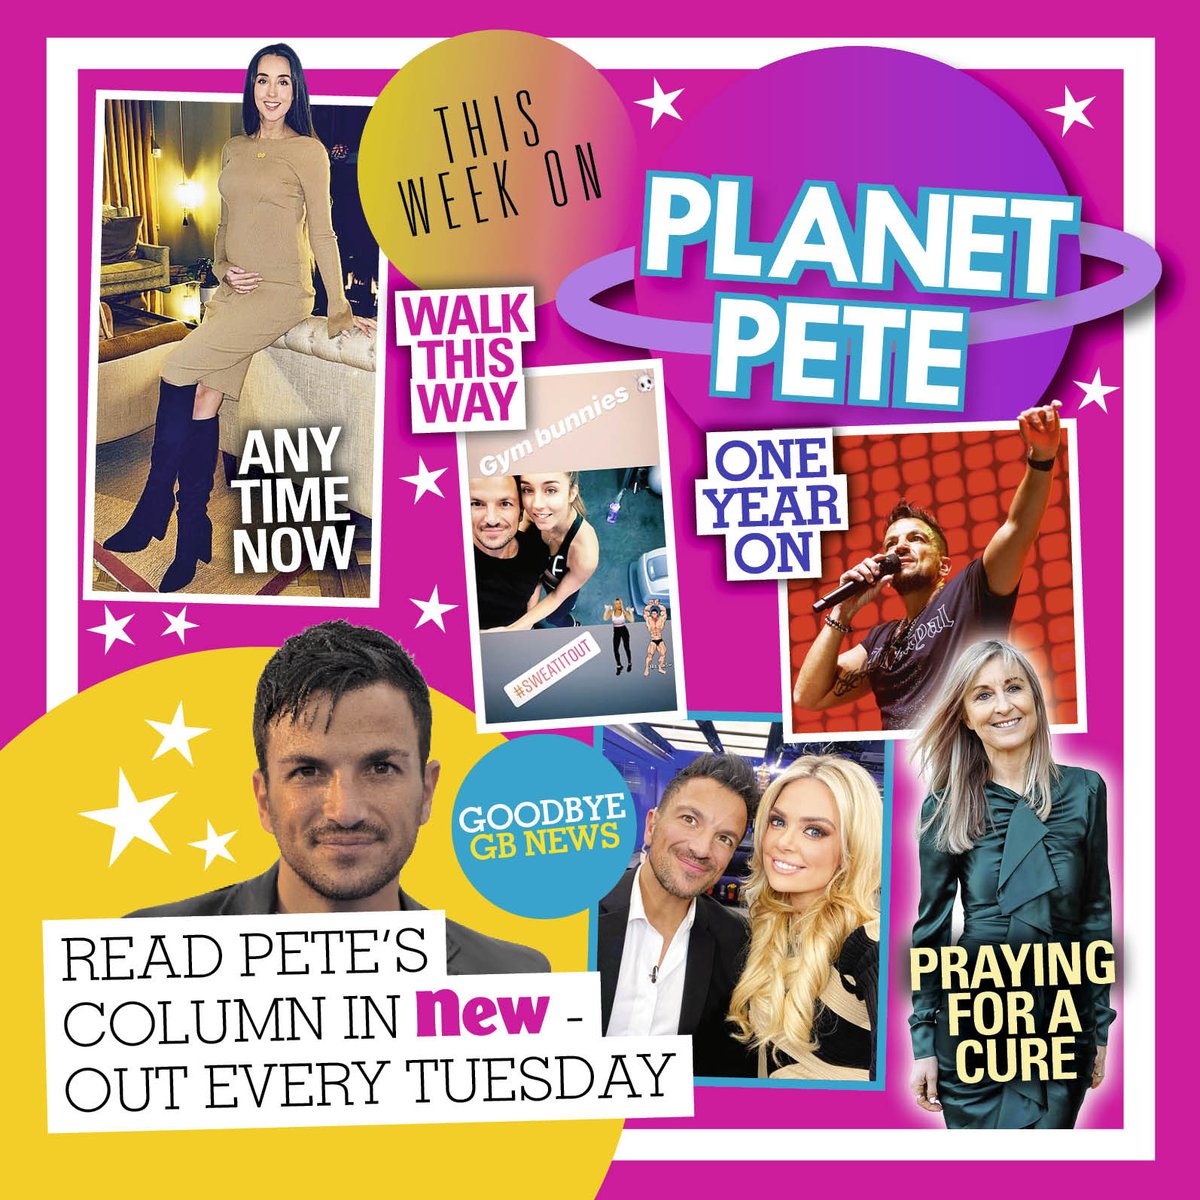 PLANET PETE! In this week’s issue, Peter Andre, opened up on his fears about growing older, bidding a fond farewell to GB News and needing help with names for the new baby. Out now.